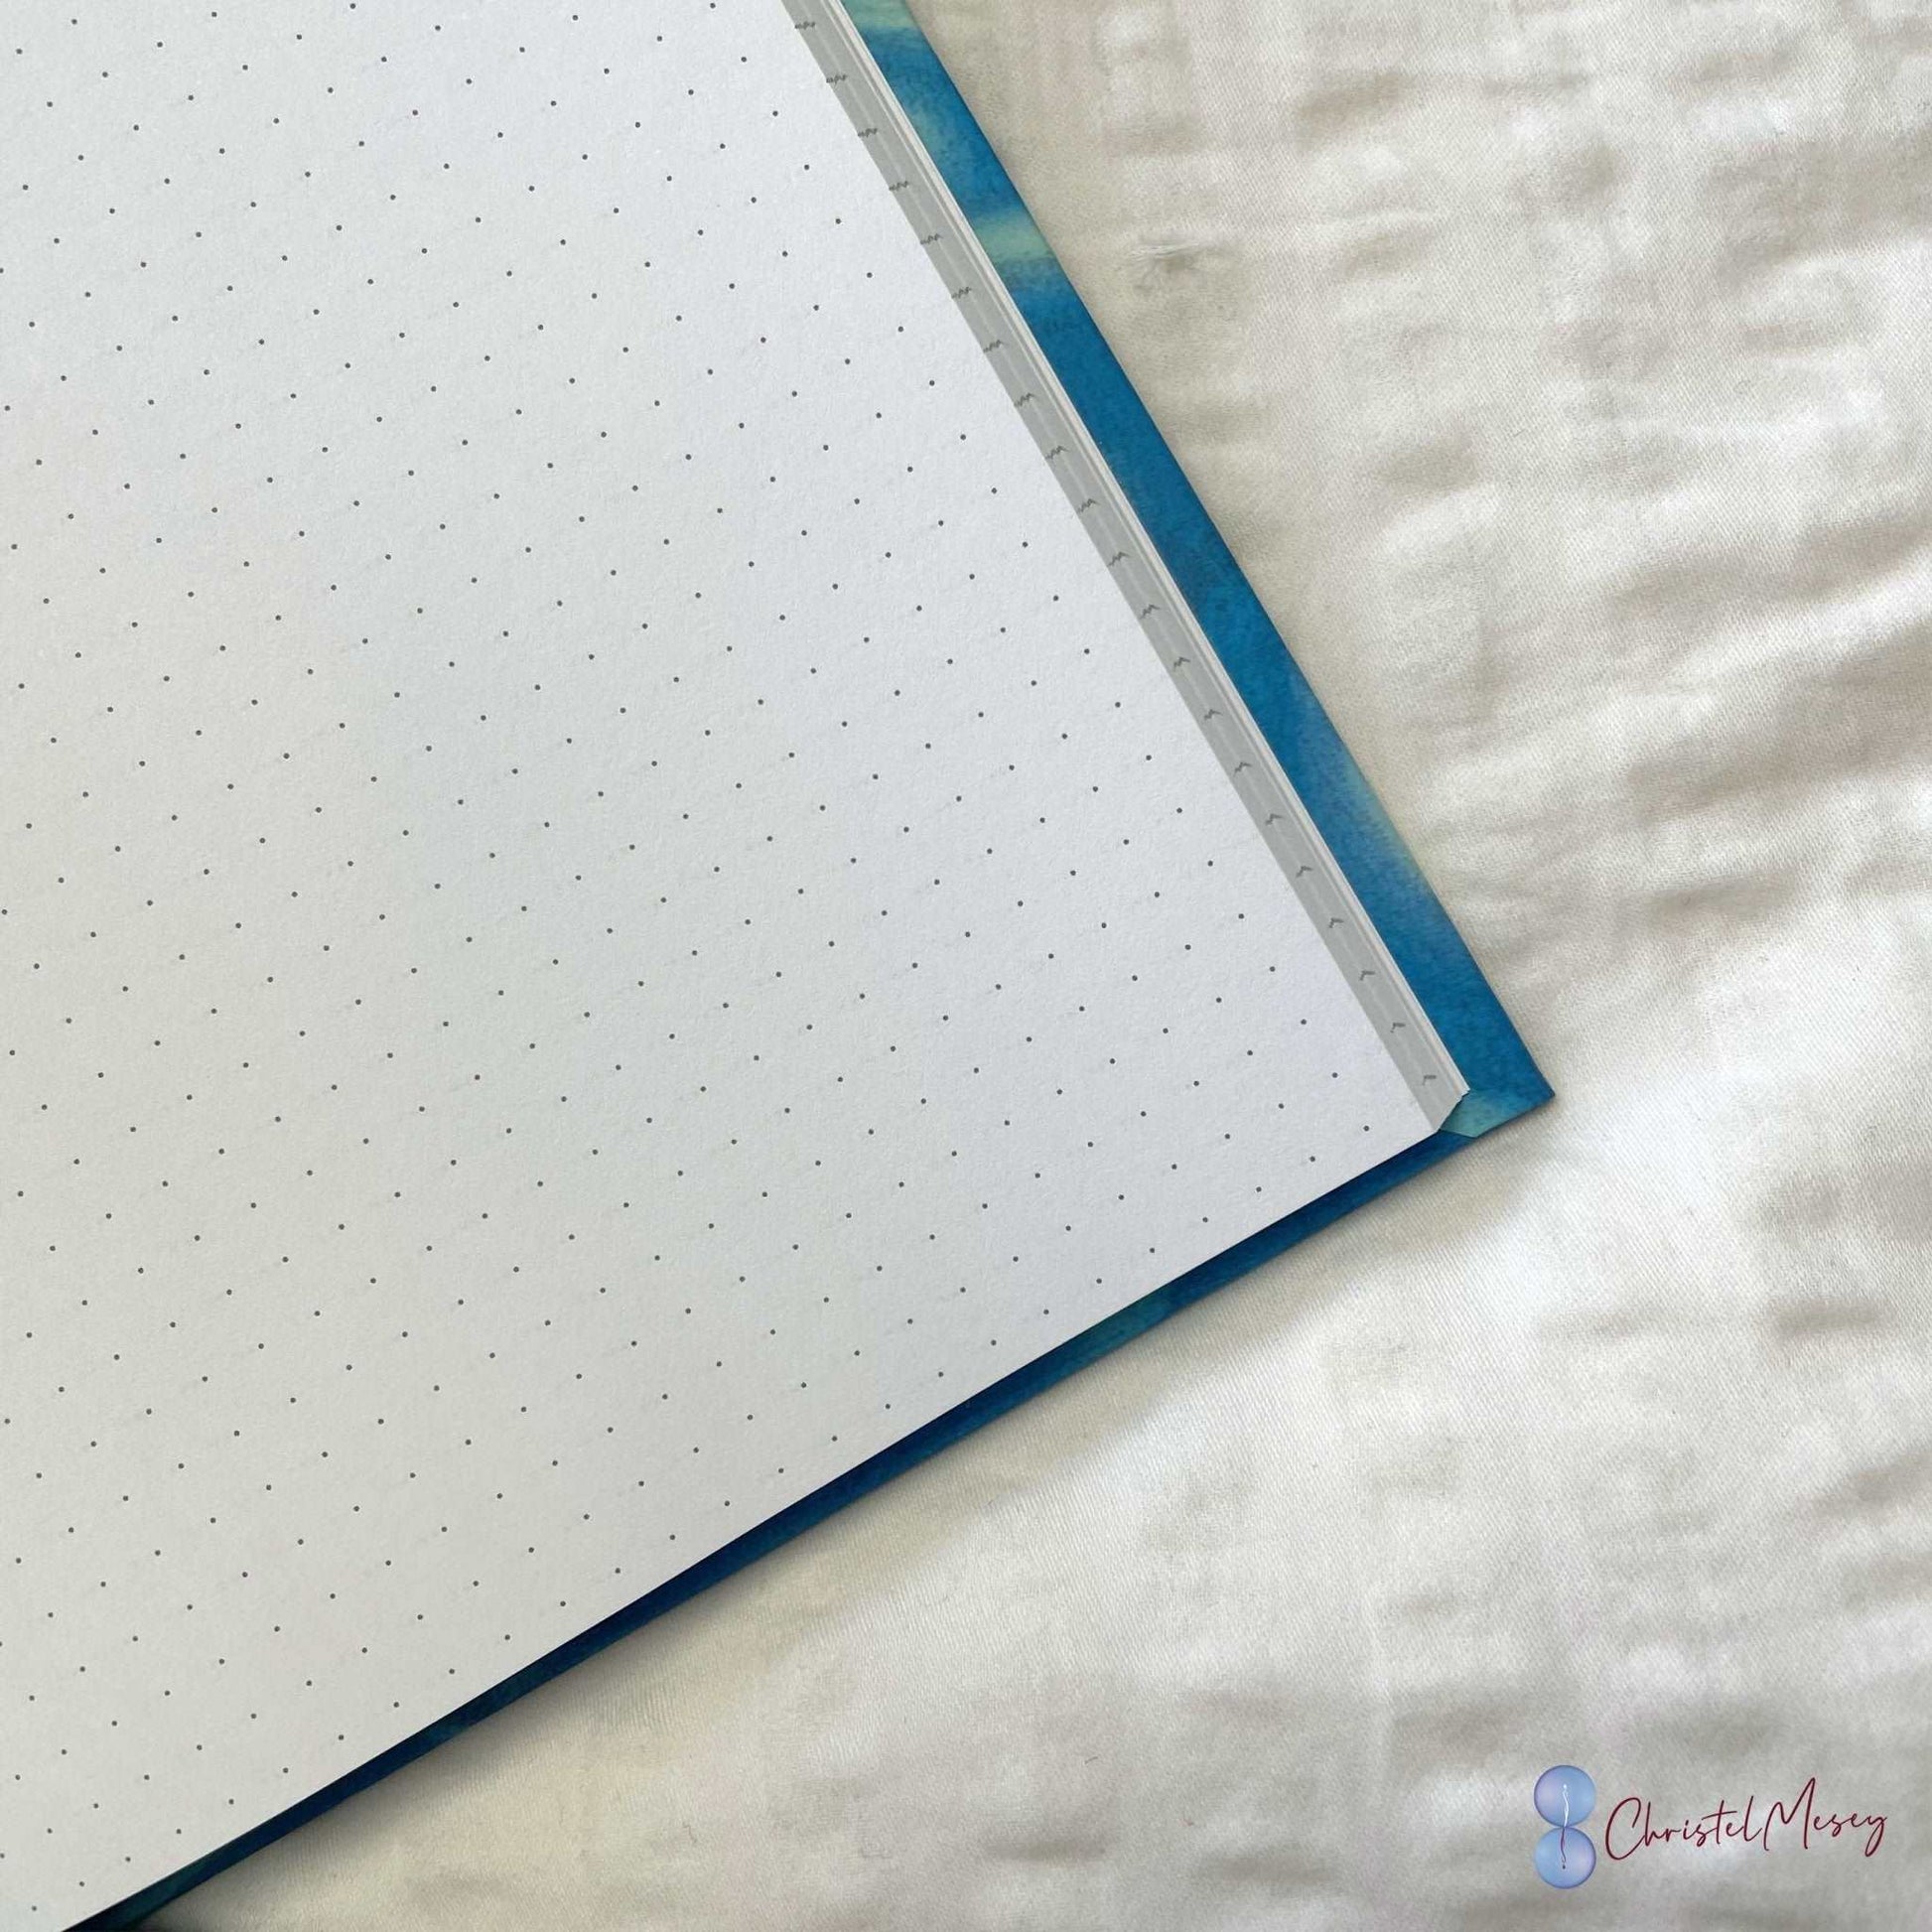 NOTEBOOK - TrustNOTEBOOK - Trust the process - Hardcover with Dotted pages